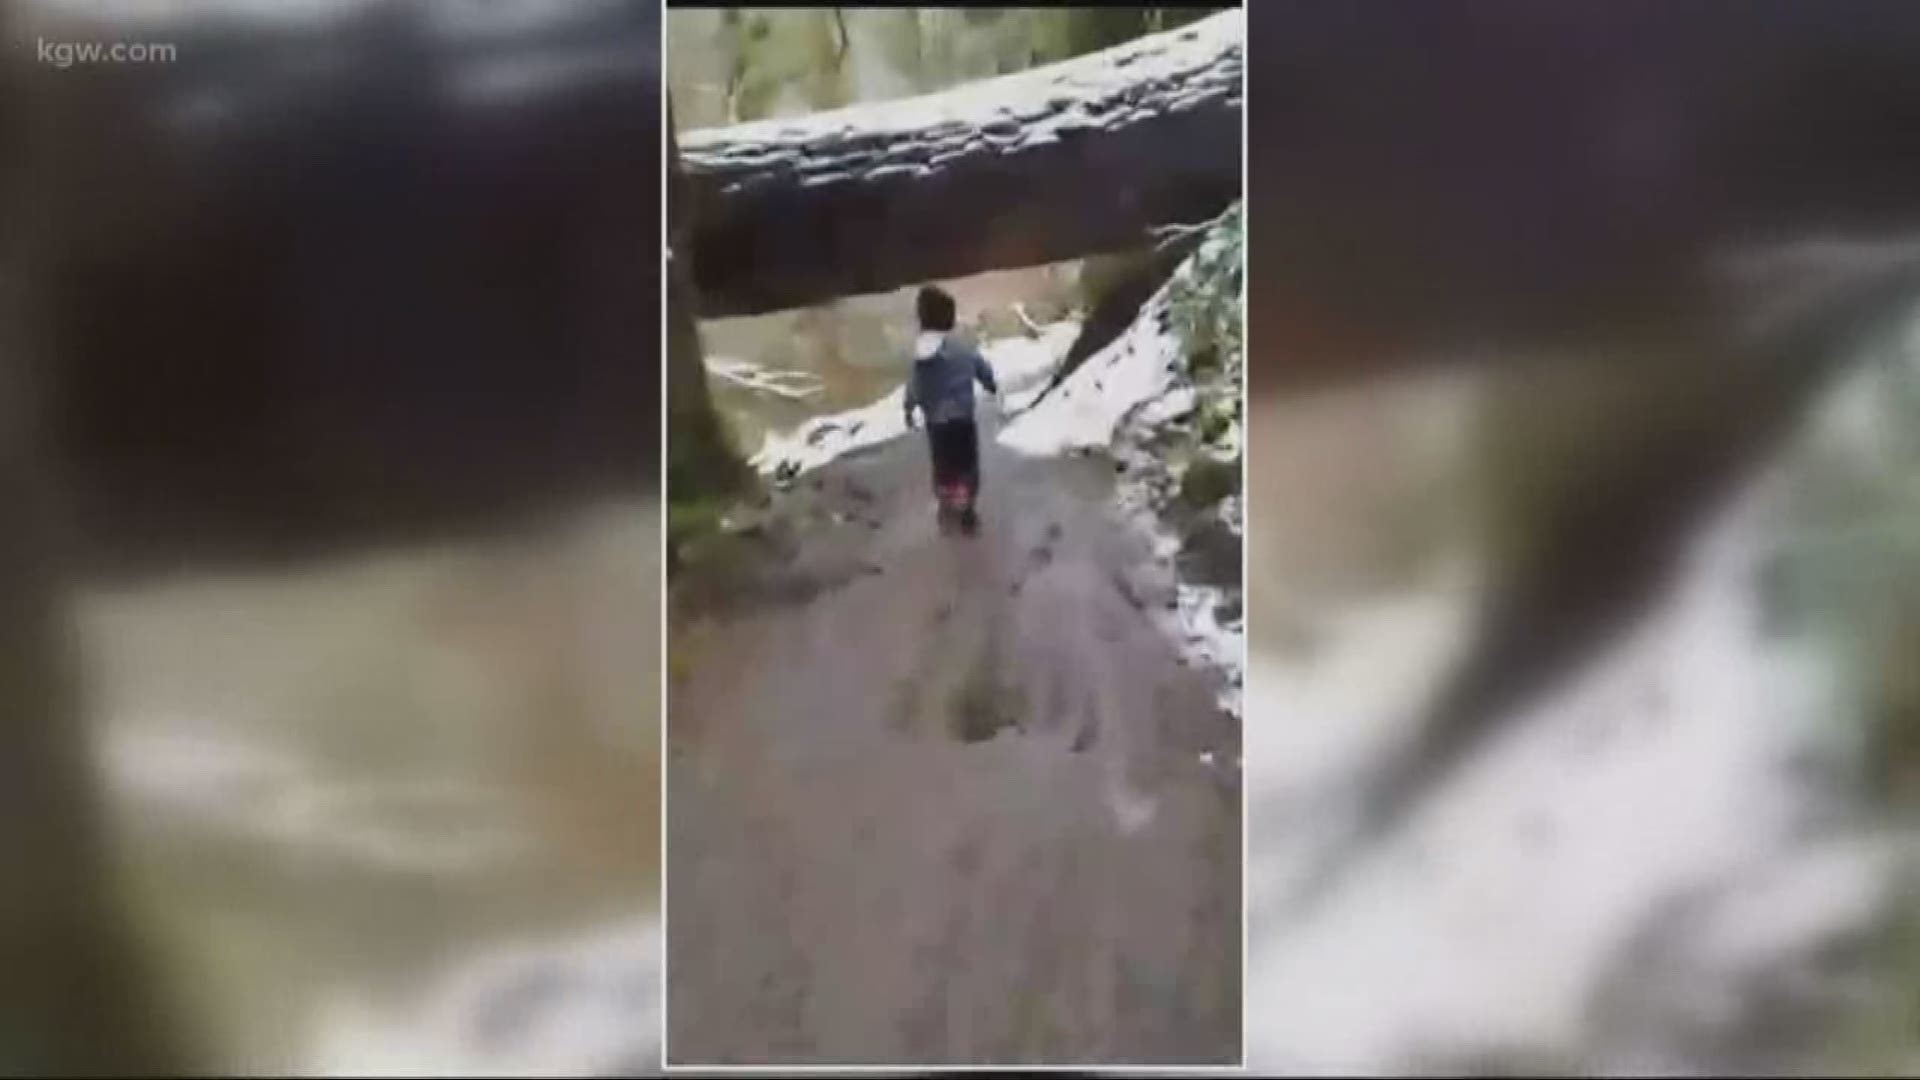 A mom spent the night in Sliver Falls State Park with her 3-year-old son after getting lost on a hike.